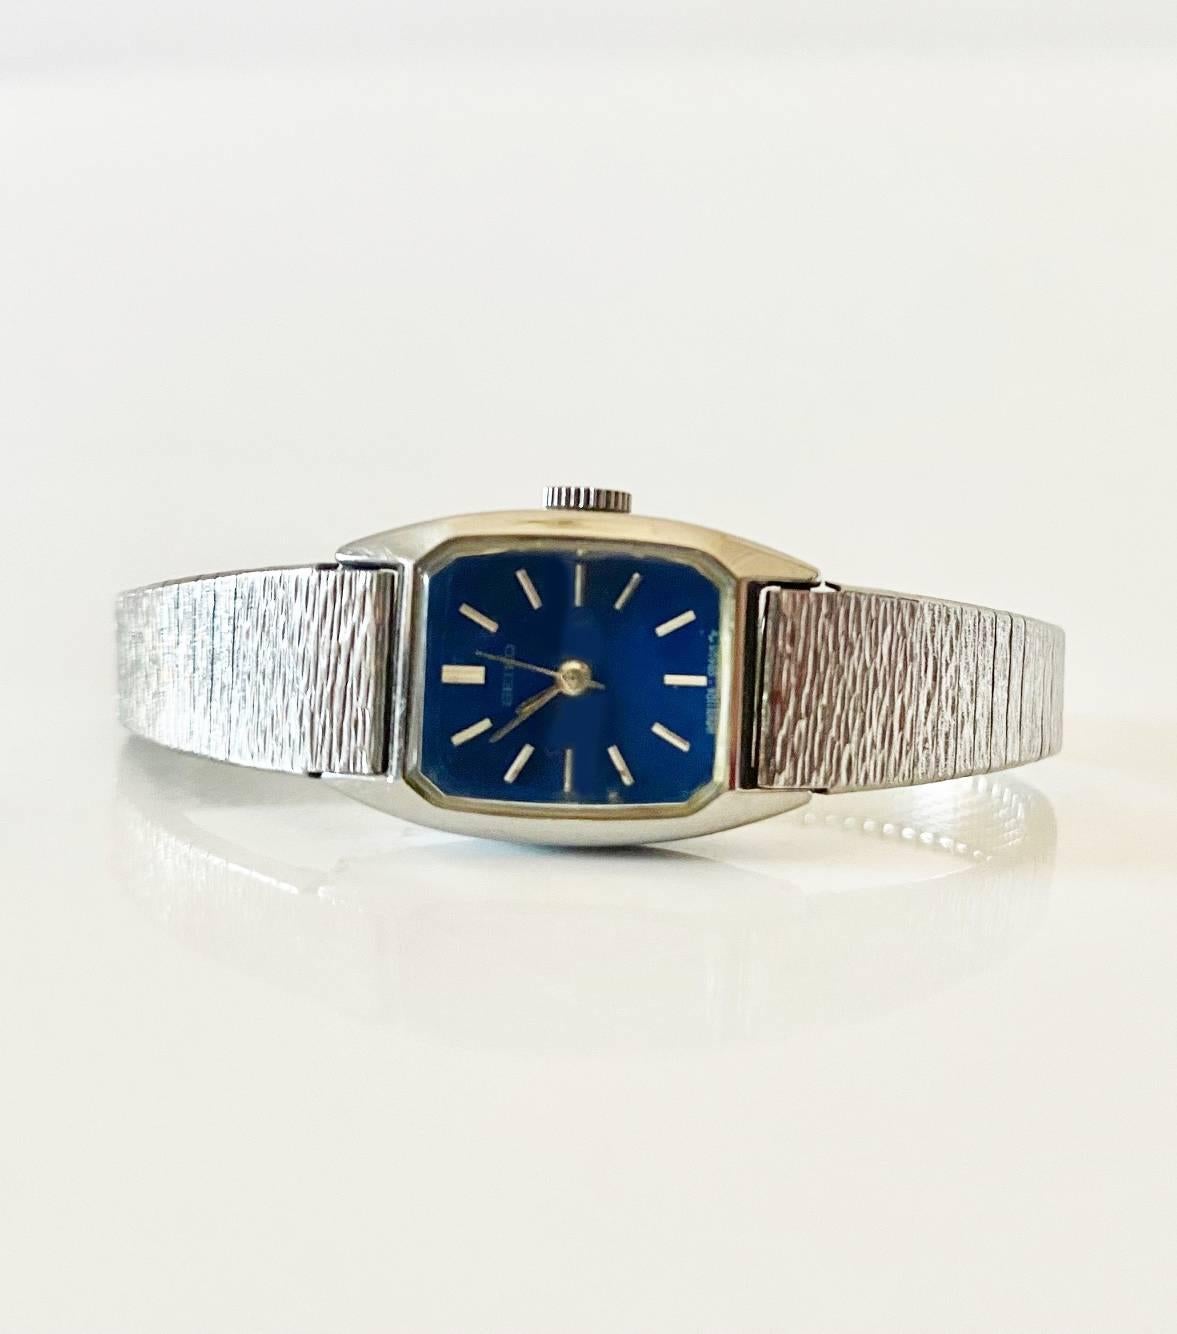 Elegant and iconic, this 1970s Seiko Stainless Steel Jewel Watch with a blue face features a manual movement, analogue display, 12-hour dial, mineral crystal, and a push/pull crown, all crafted with precision and finesse, Made in Japan

Condition: